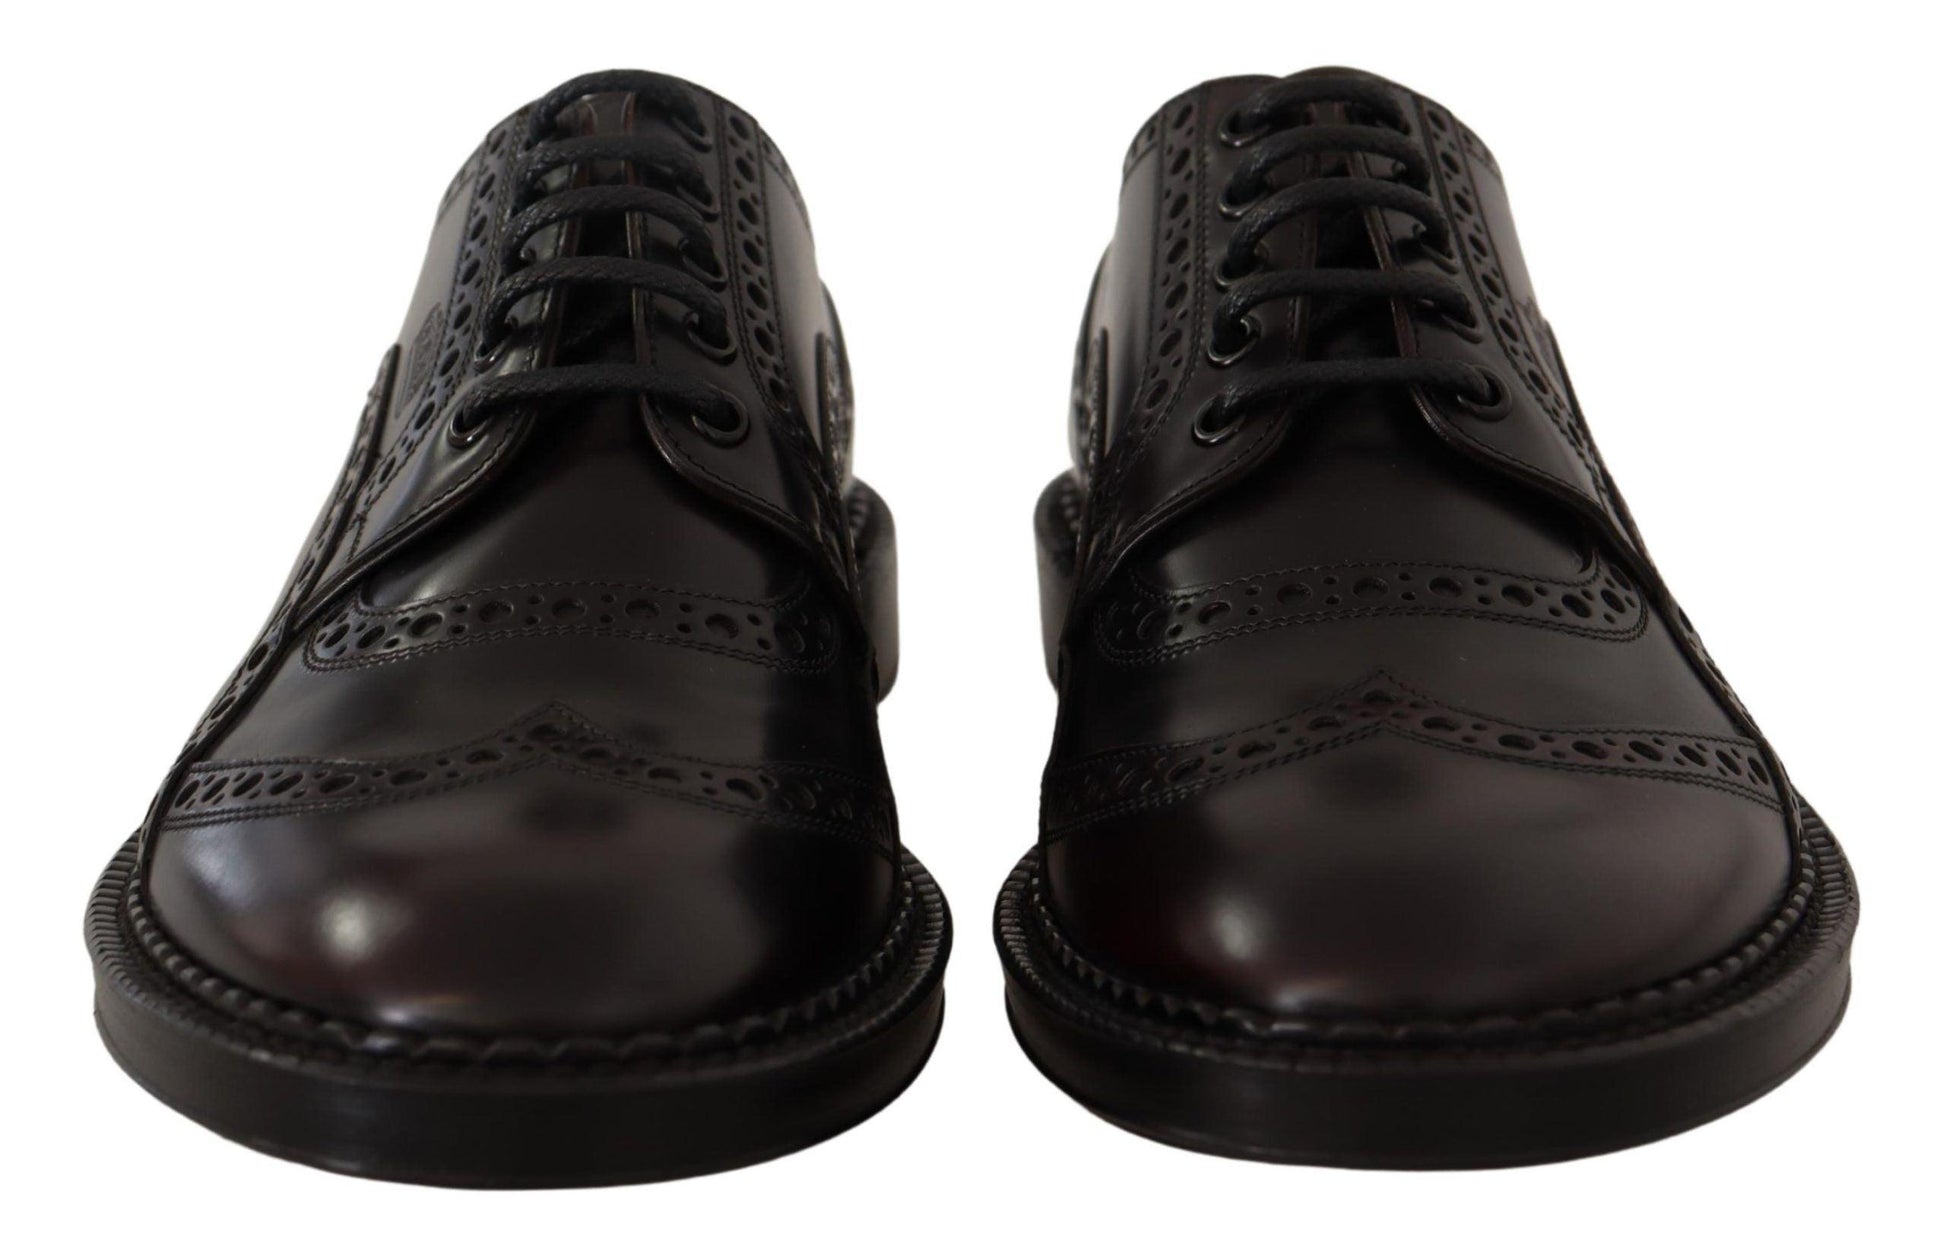 Dolce & Gabbana Purple Leather Oxford Wingtip Formal Shoes - Designed by Dolce & Gabbana Available to Buy at a Discounted Price on Moon Behind The Hill Online Designer Discount Store